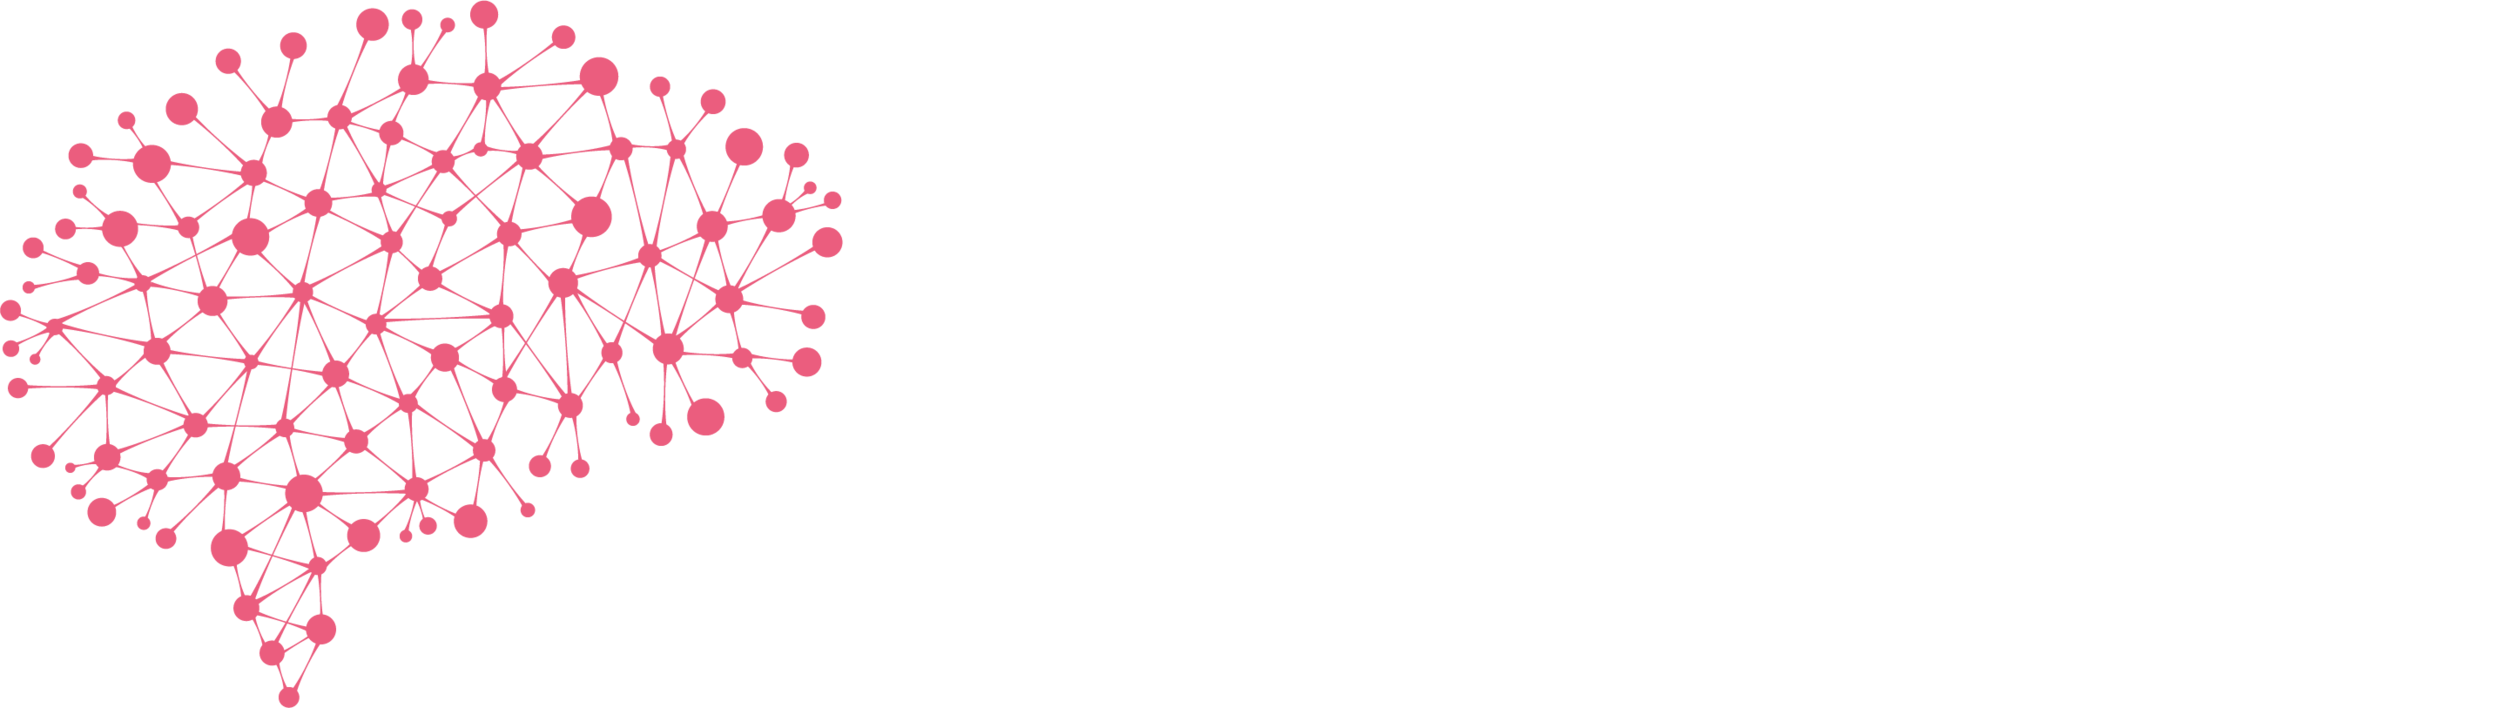 Project Brains - Future of Work